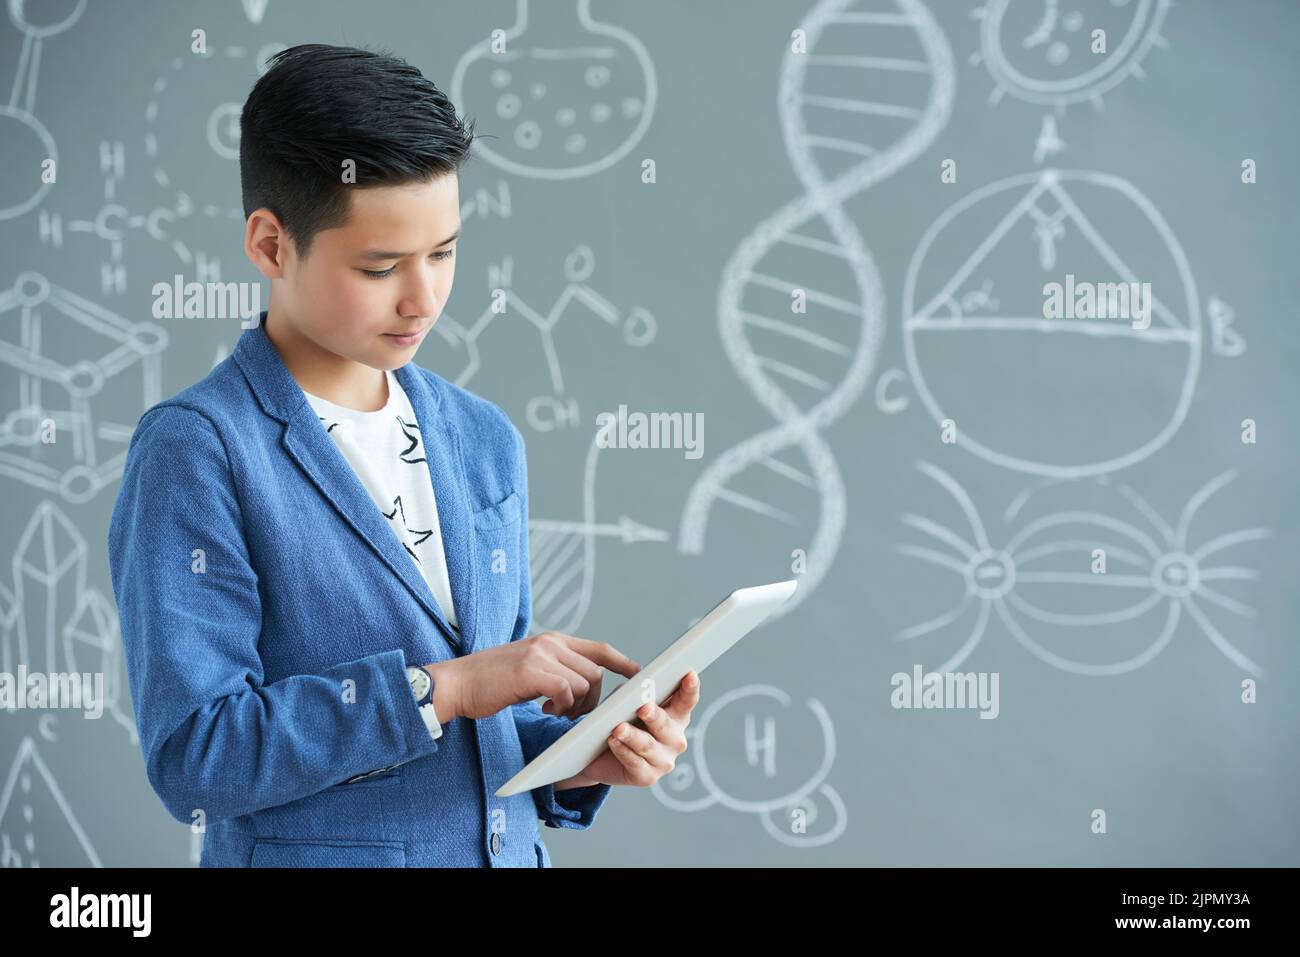 Concentrated Asian student wearing jacket and T-shirt finishing school project with help of modern digital tablet while standing against blackboard, portrait shot Stock Photo